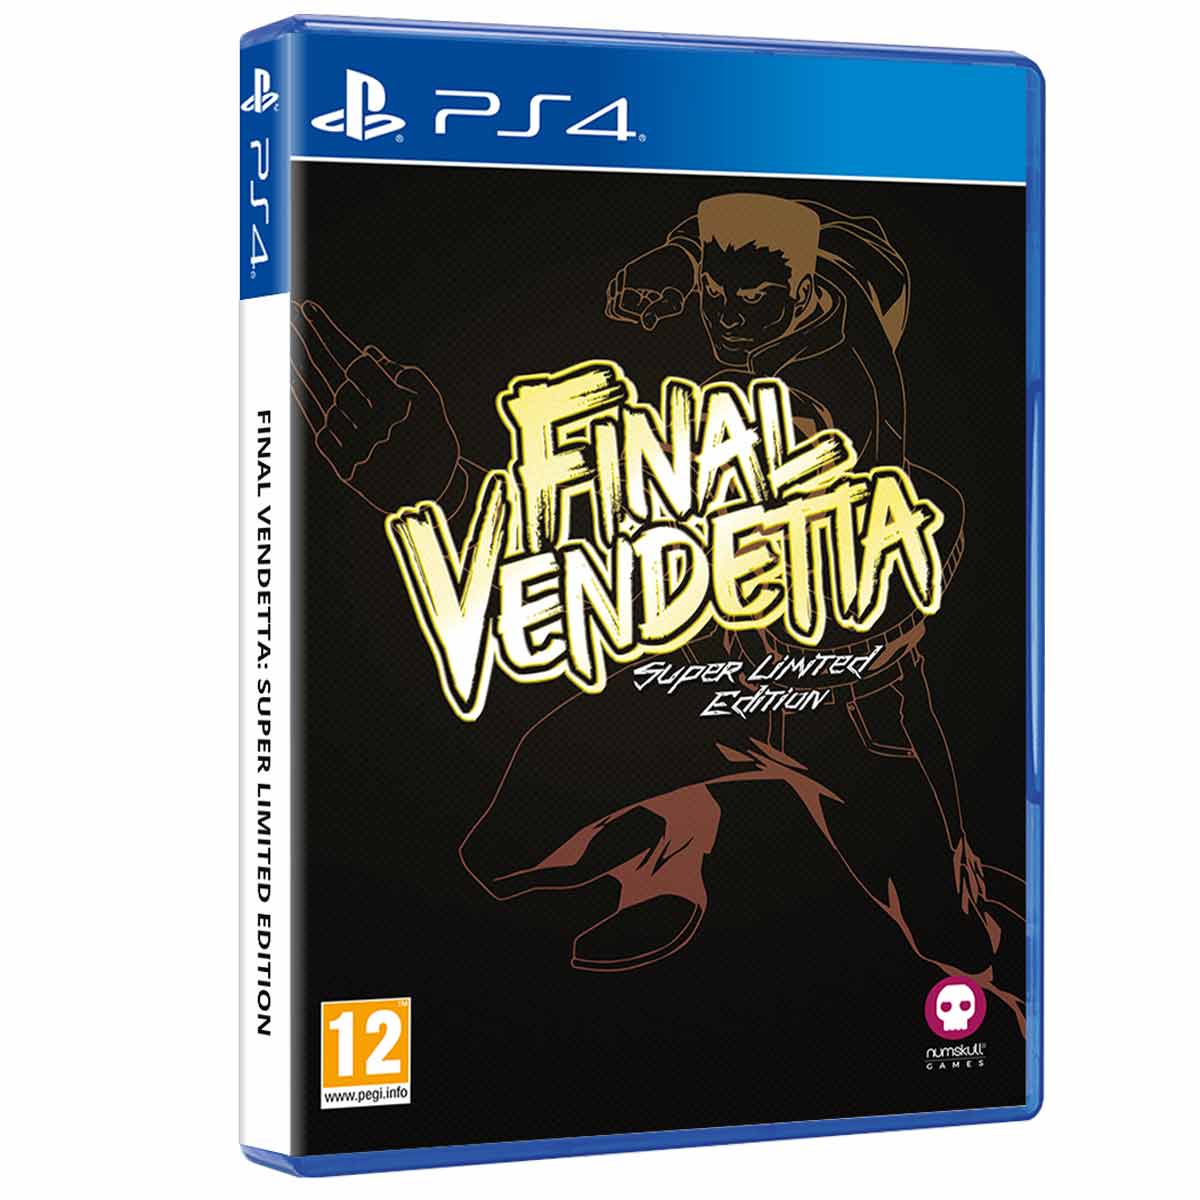 Image of Final Vendetta Super Limited Edition - PlayStation 4